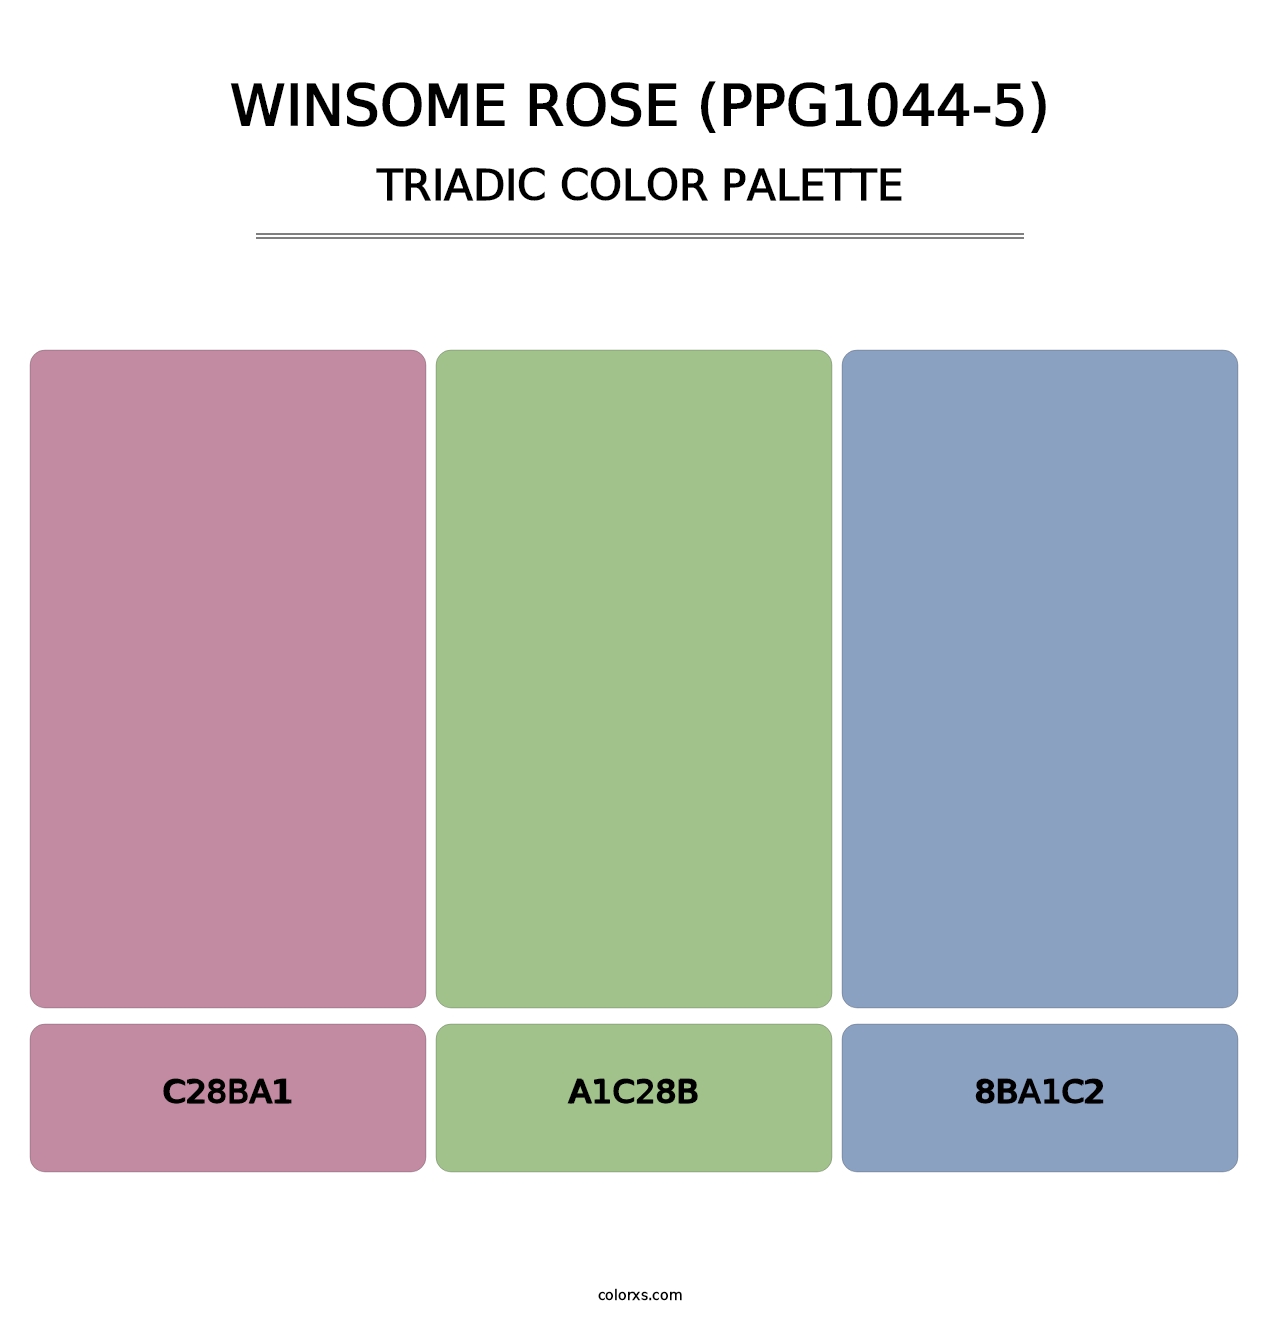 Winsome Rose (PPG1044-5) - Triadic Color Palette